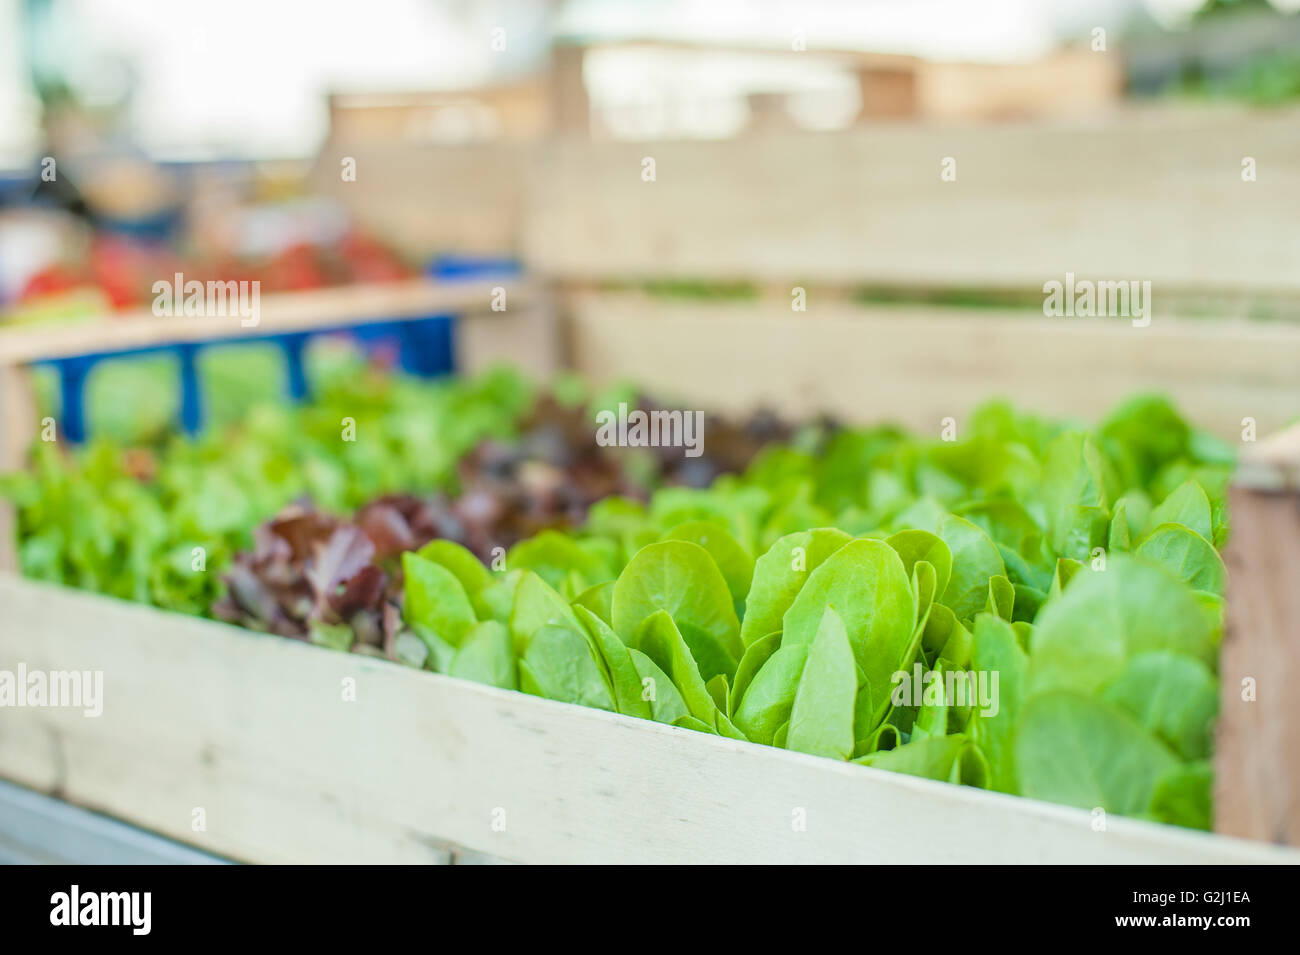 Green salad leaves on market stall detail in selective focus Stock Photo